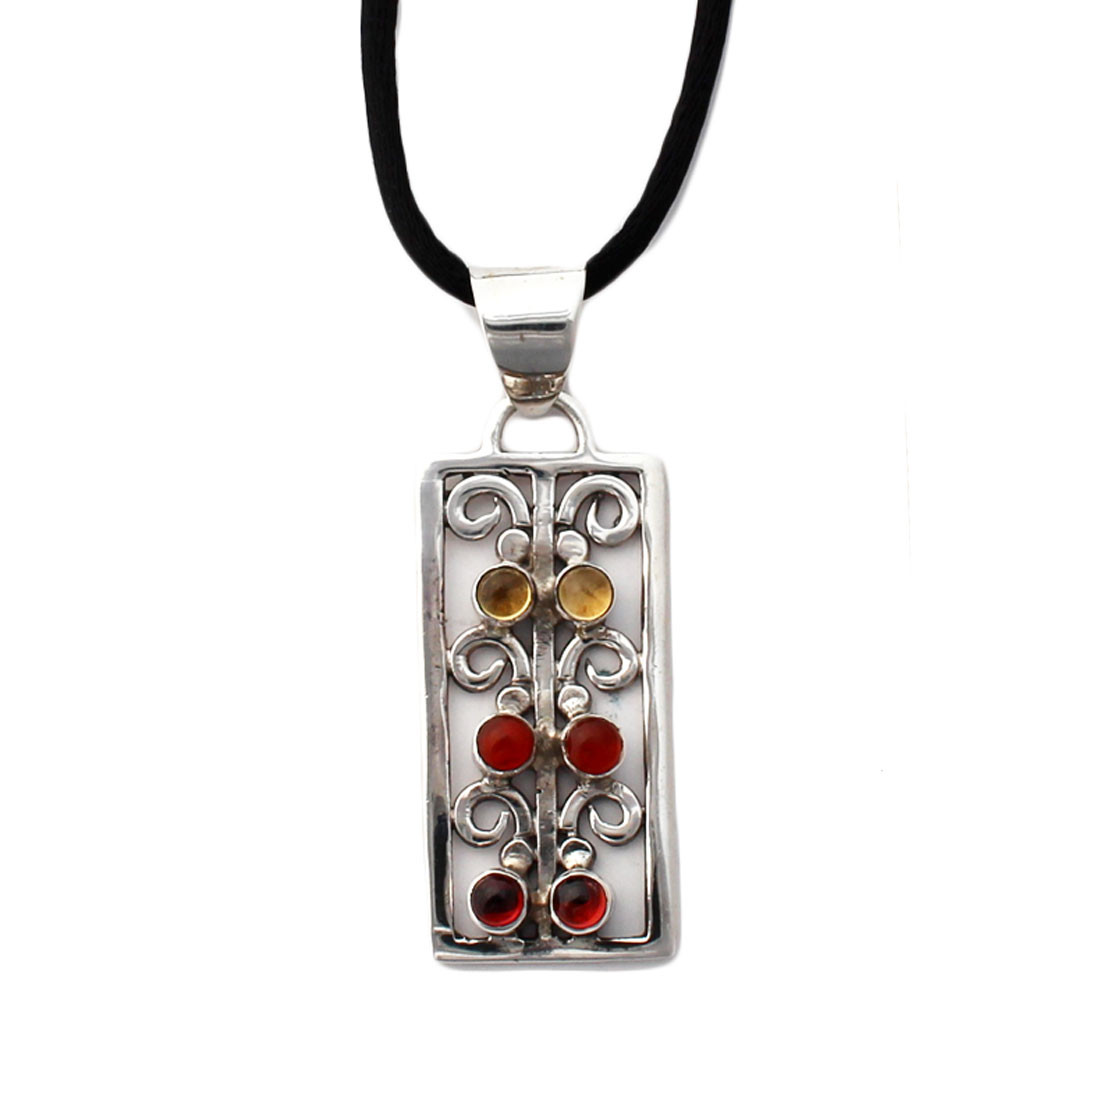 Citrine, Carnelian and Garnet sterling silver pendant with black nylon necklace. 